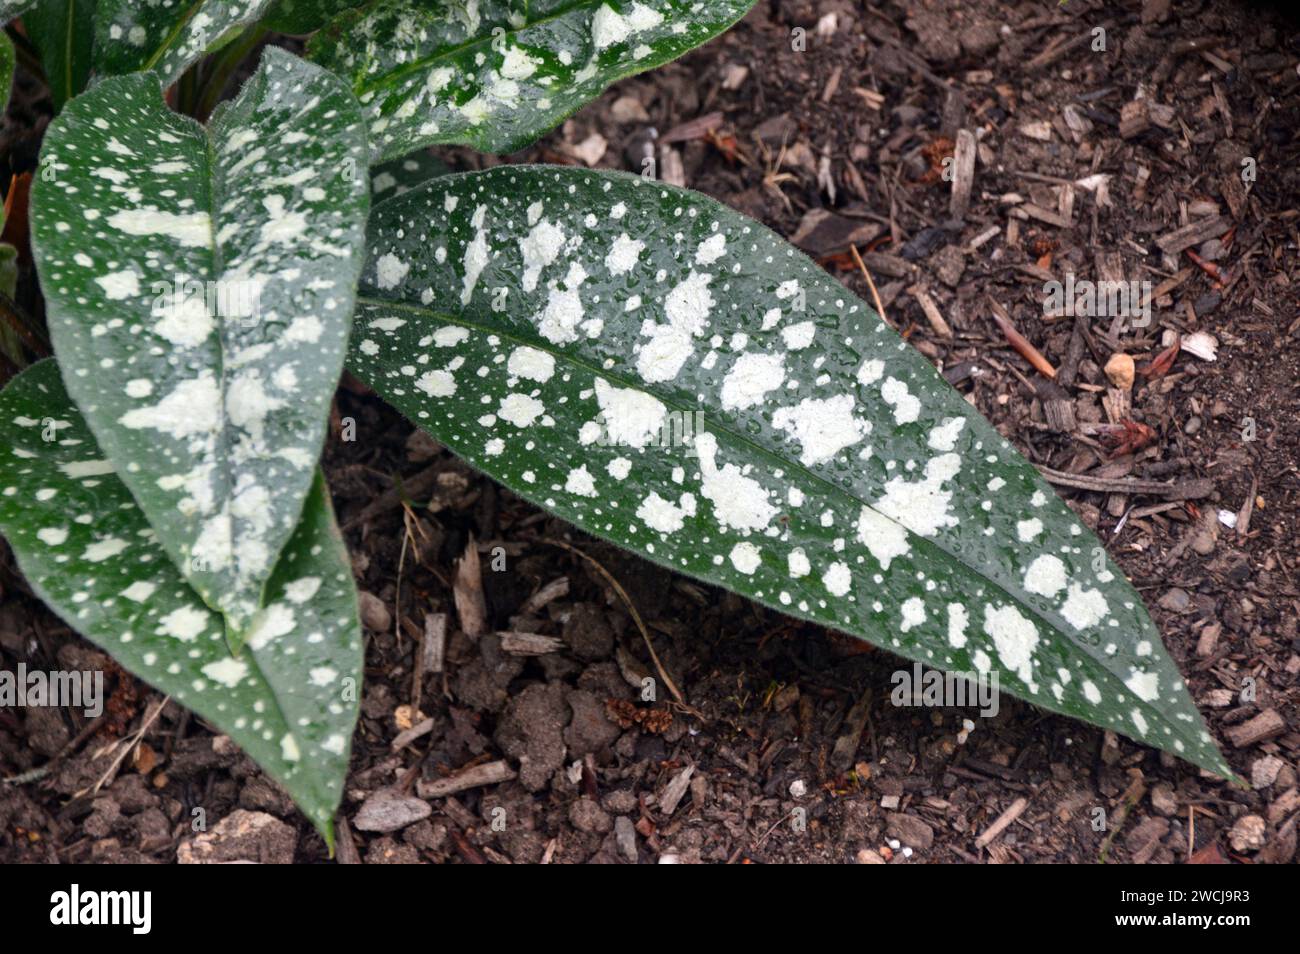 Marbled White Spotty Pulmonaria Saccharata (Bethlehem Lungwort) Leaves grown in the Borders at RHS Garden Harlow Carr, Harrogate, Yorkshire, England. Stock Photo